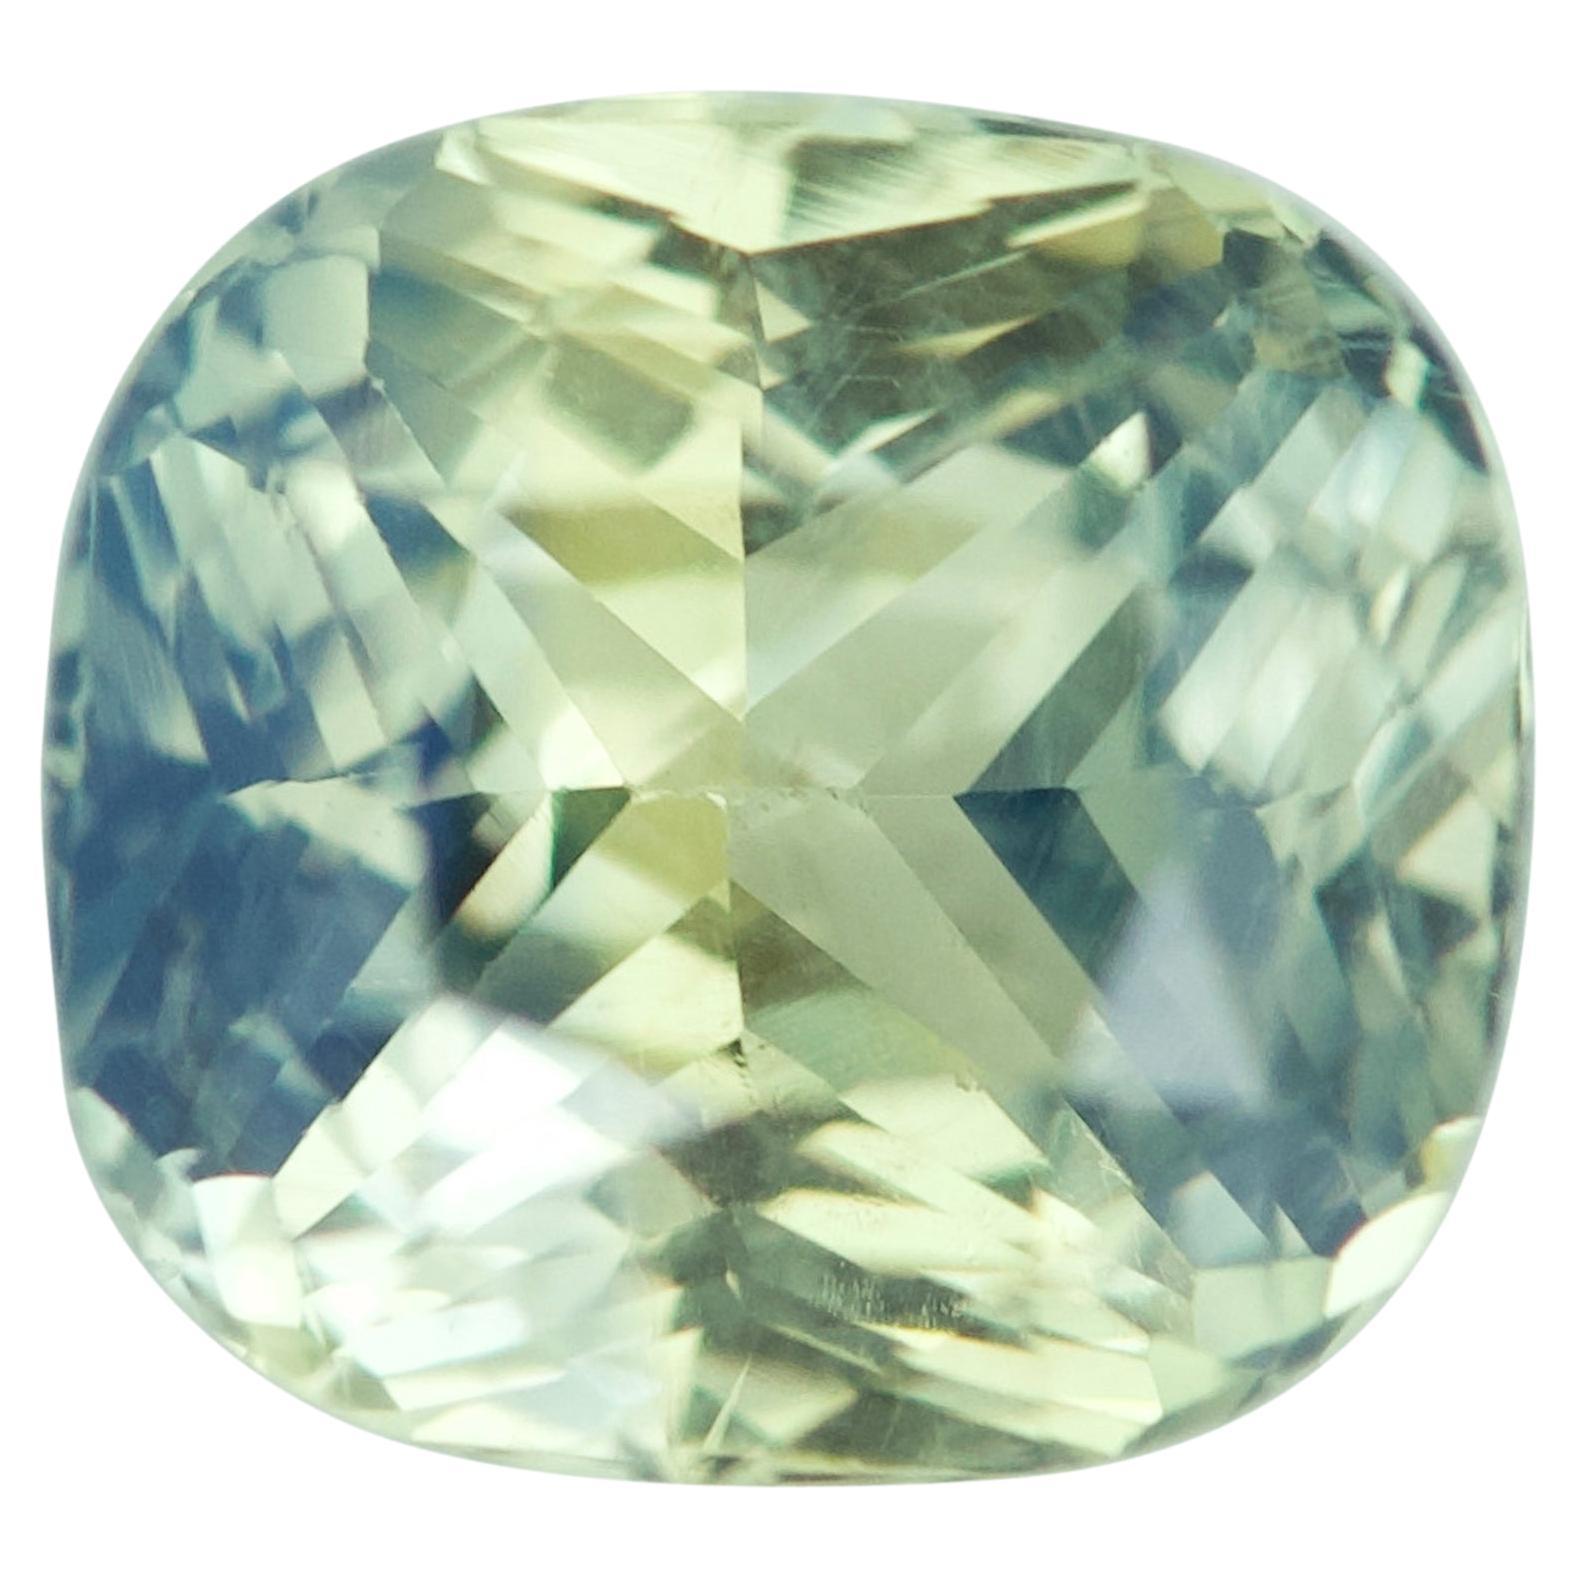 Are Parti sapphires natural?